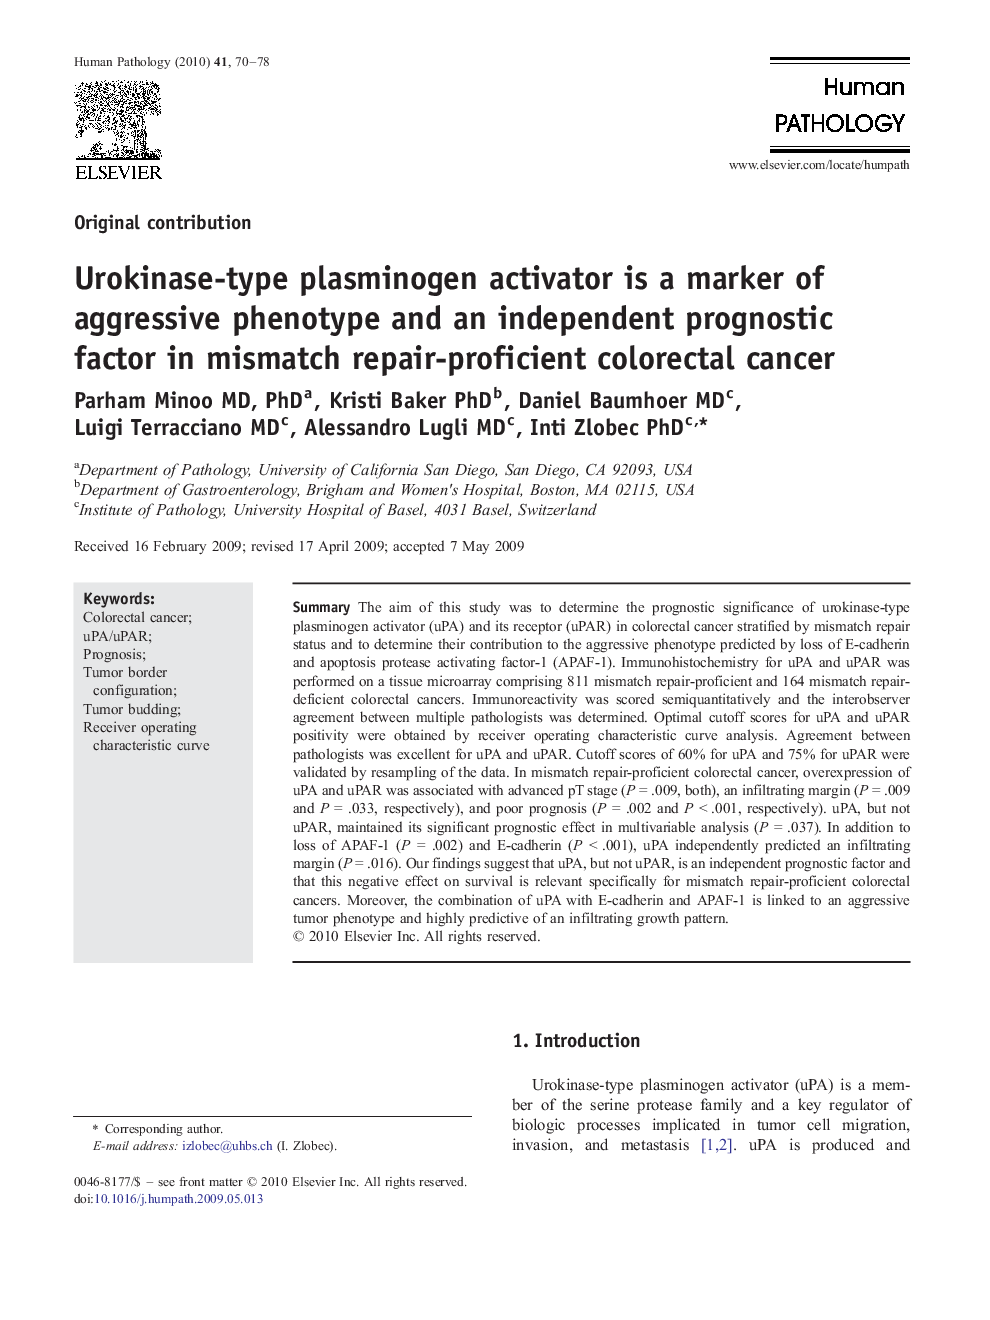 Urokinase-type plasminogen activator is a marker of aggressive phenotype and an independent prognostic factor in mismatch repair-proficient colorectal cancer